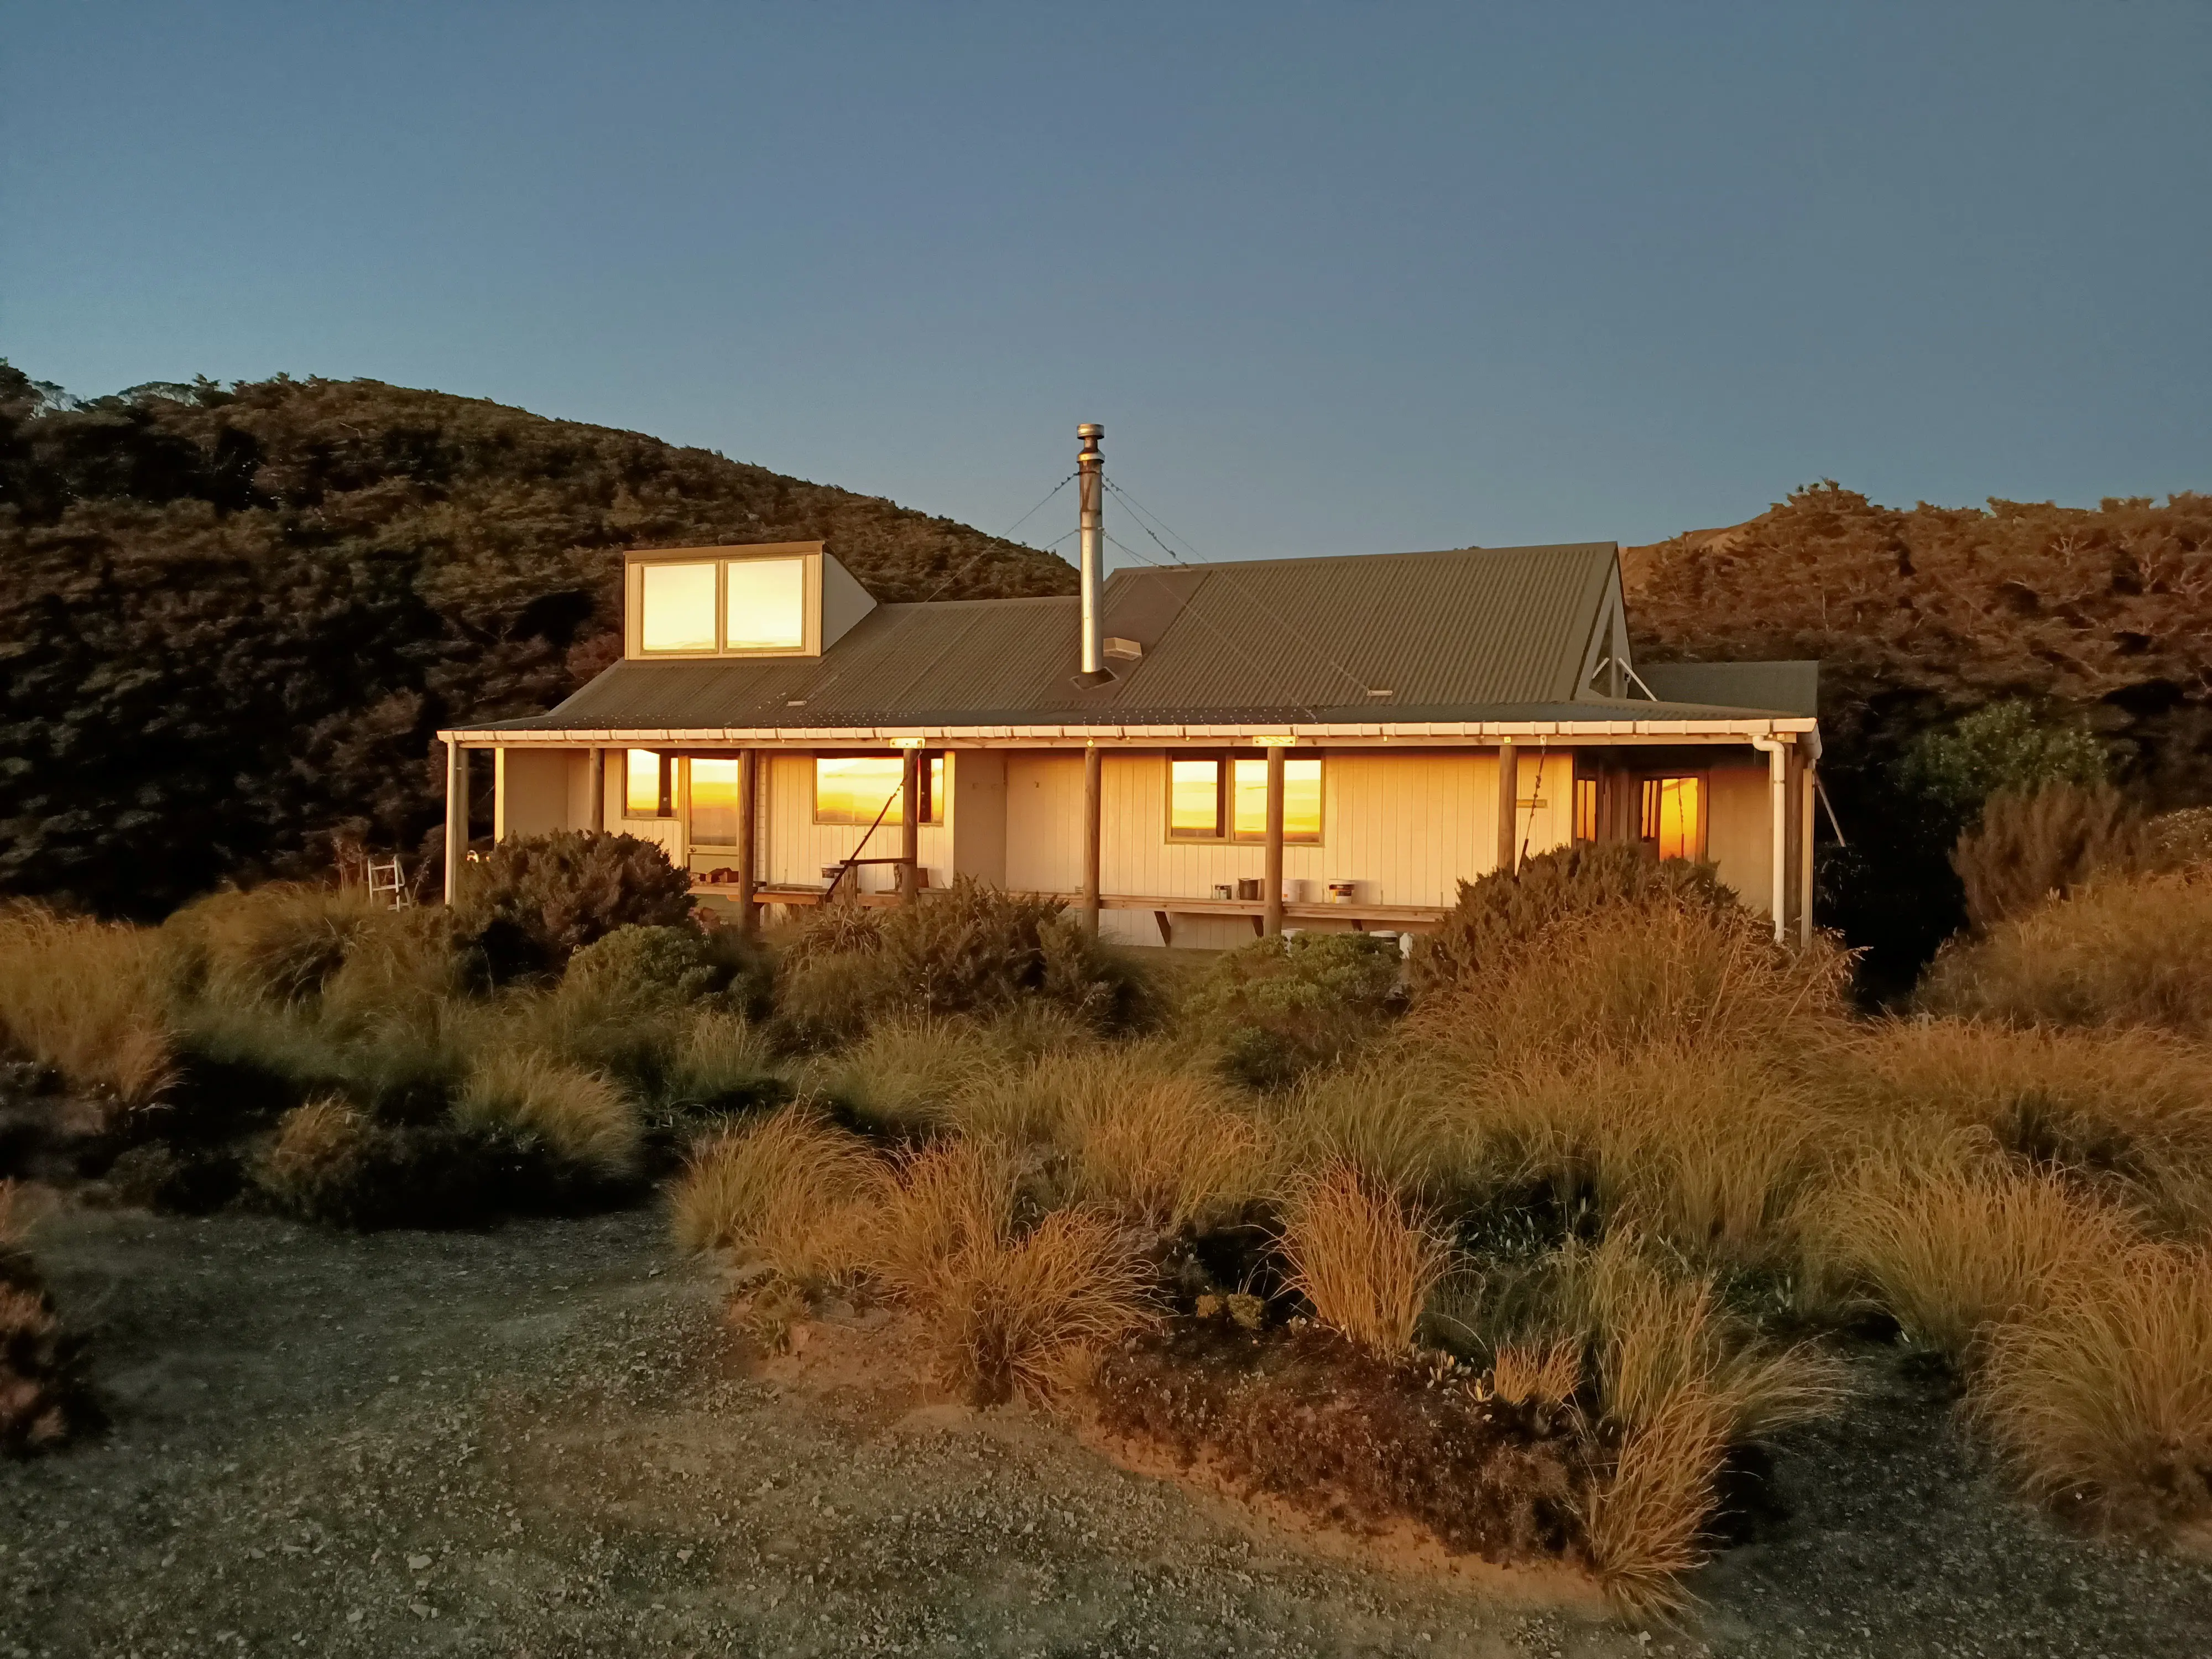 Sunrise Hut pictured with the sun rising reflecting in the windows